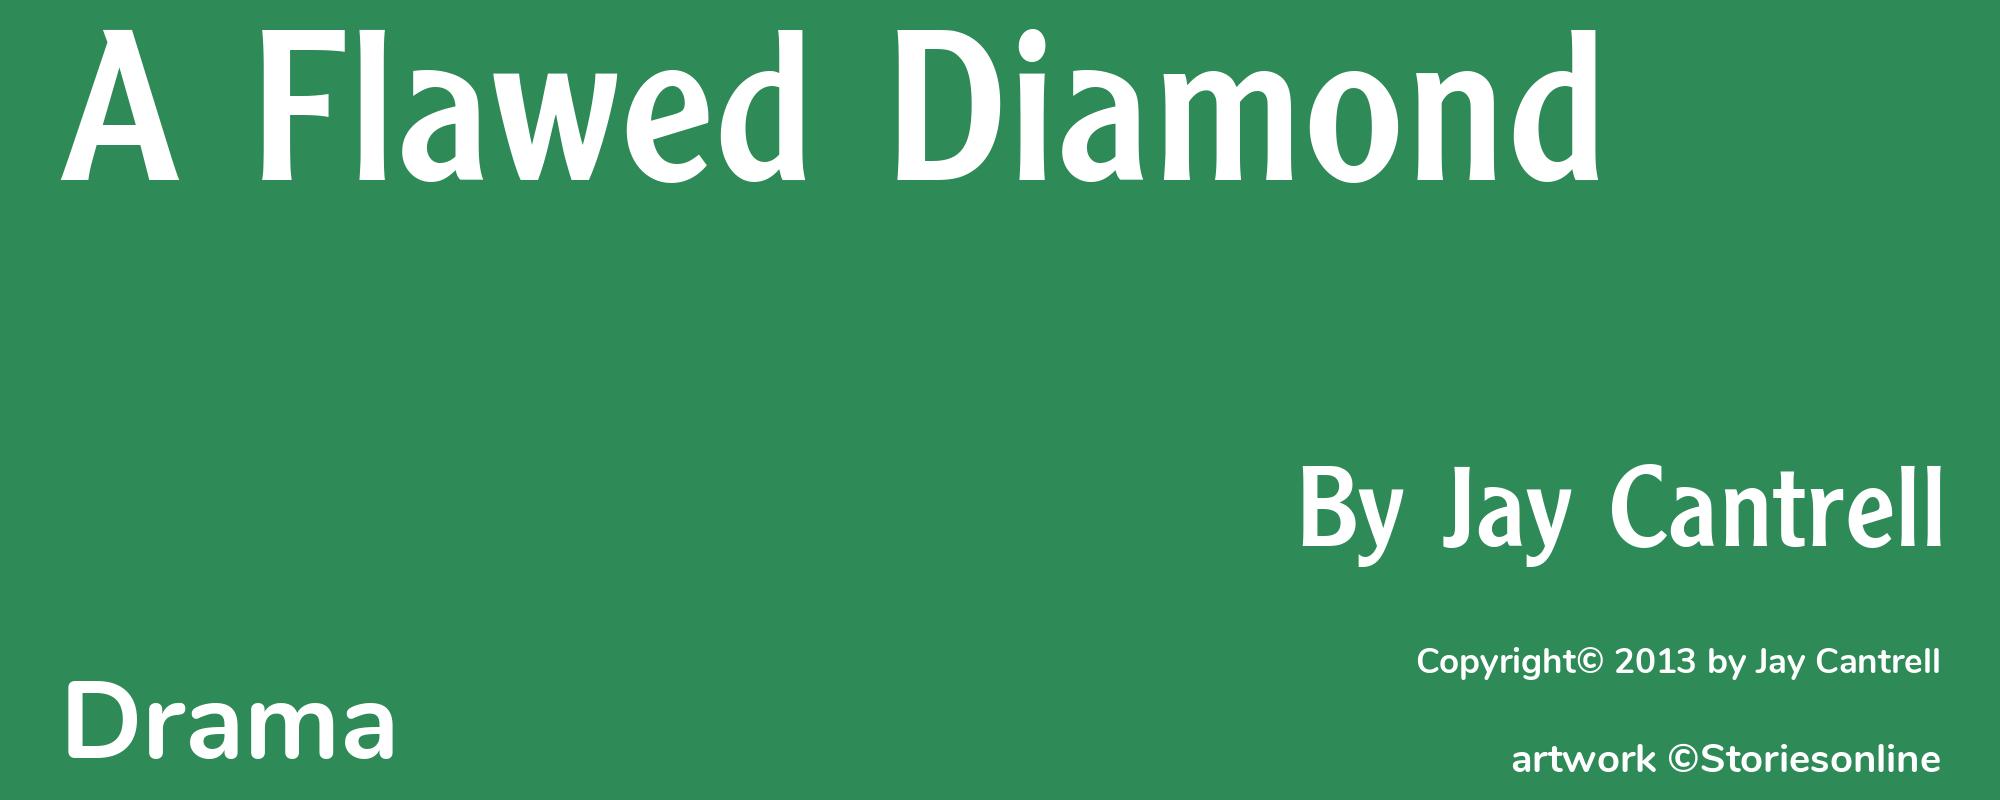 A Flawed Diamond - Cover